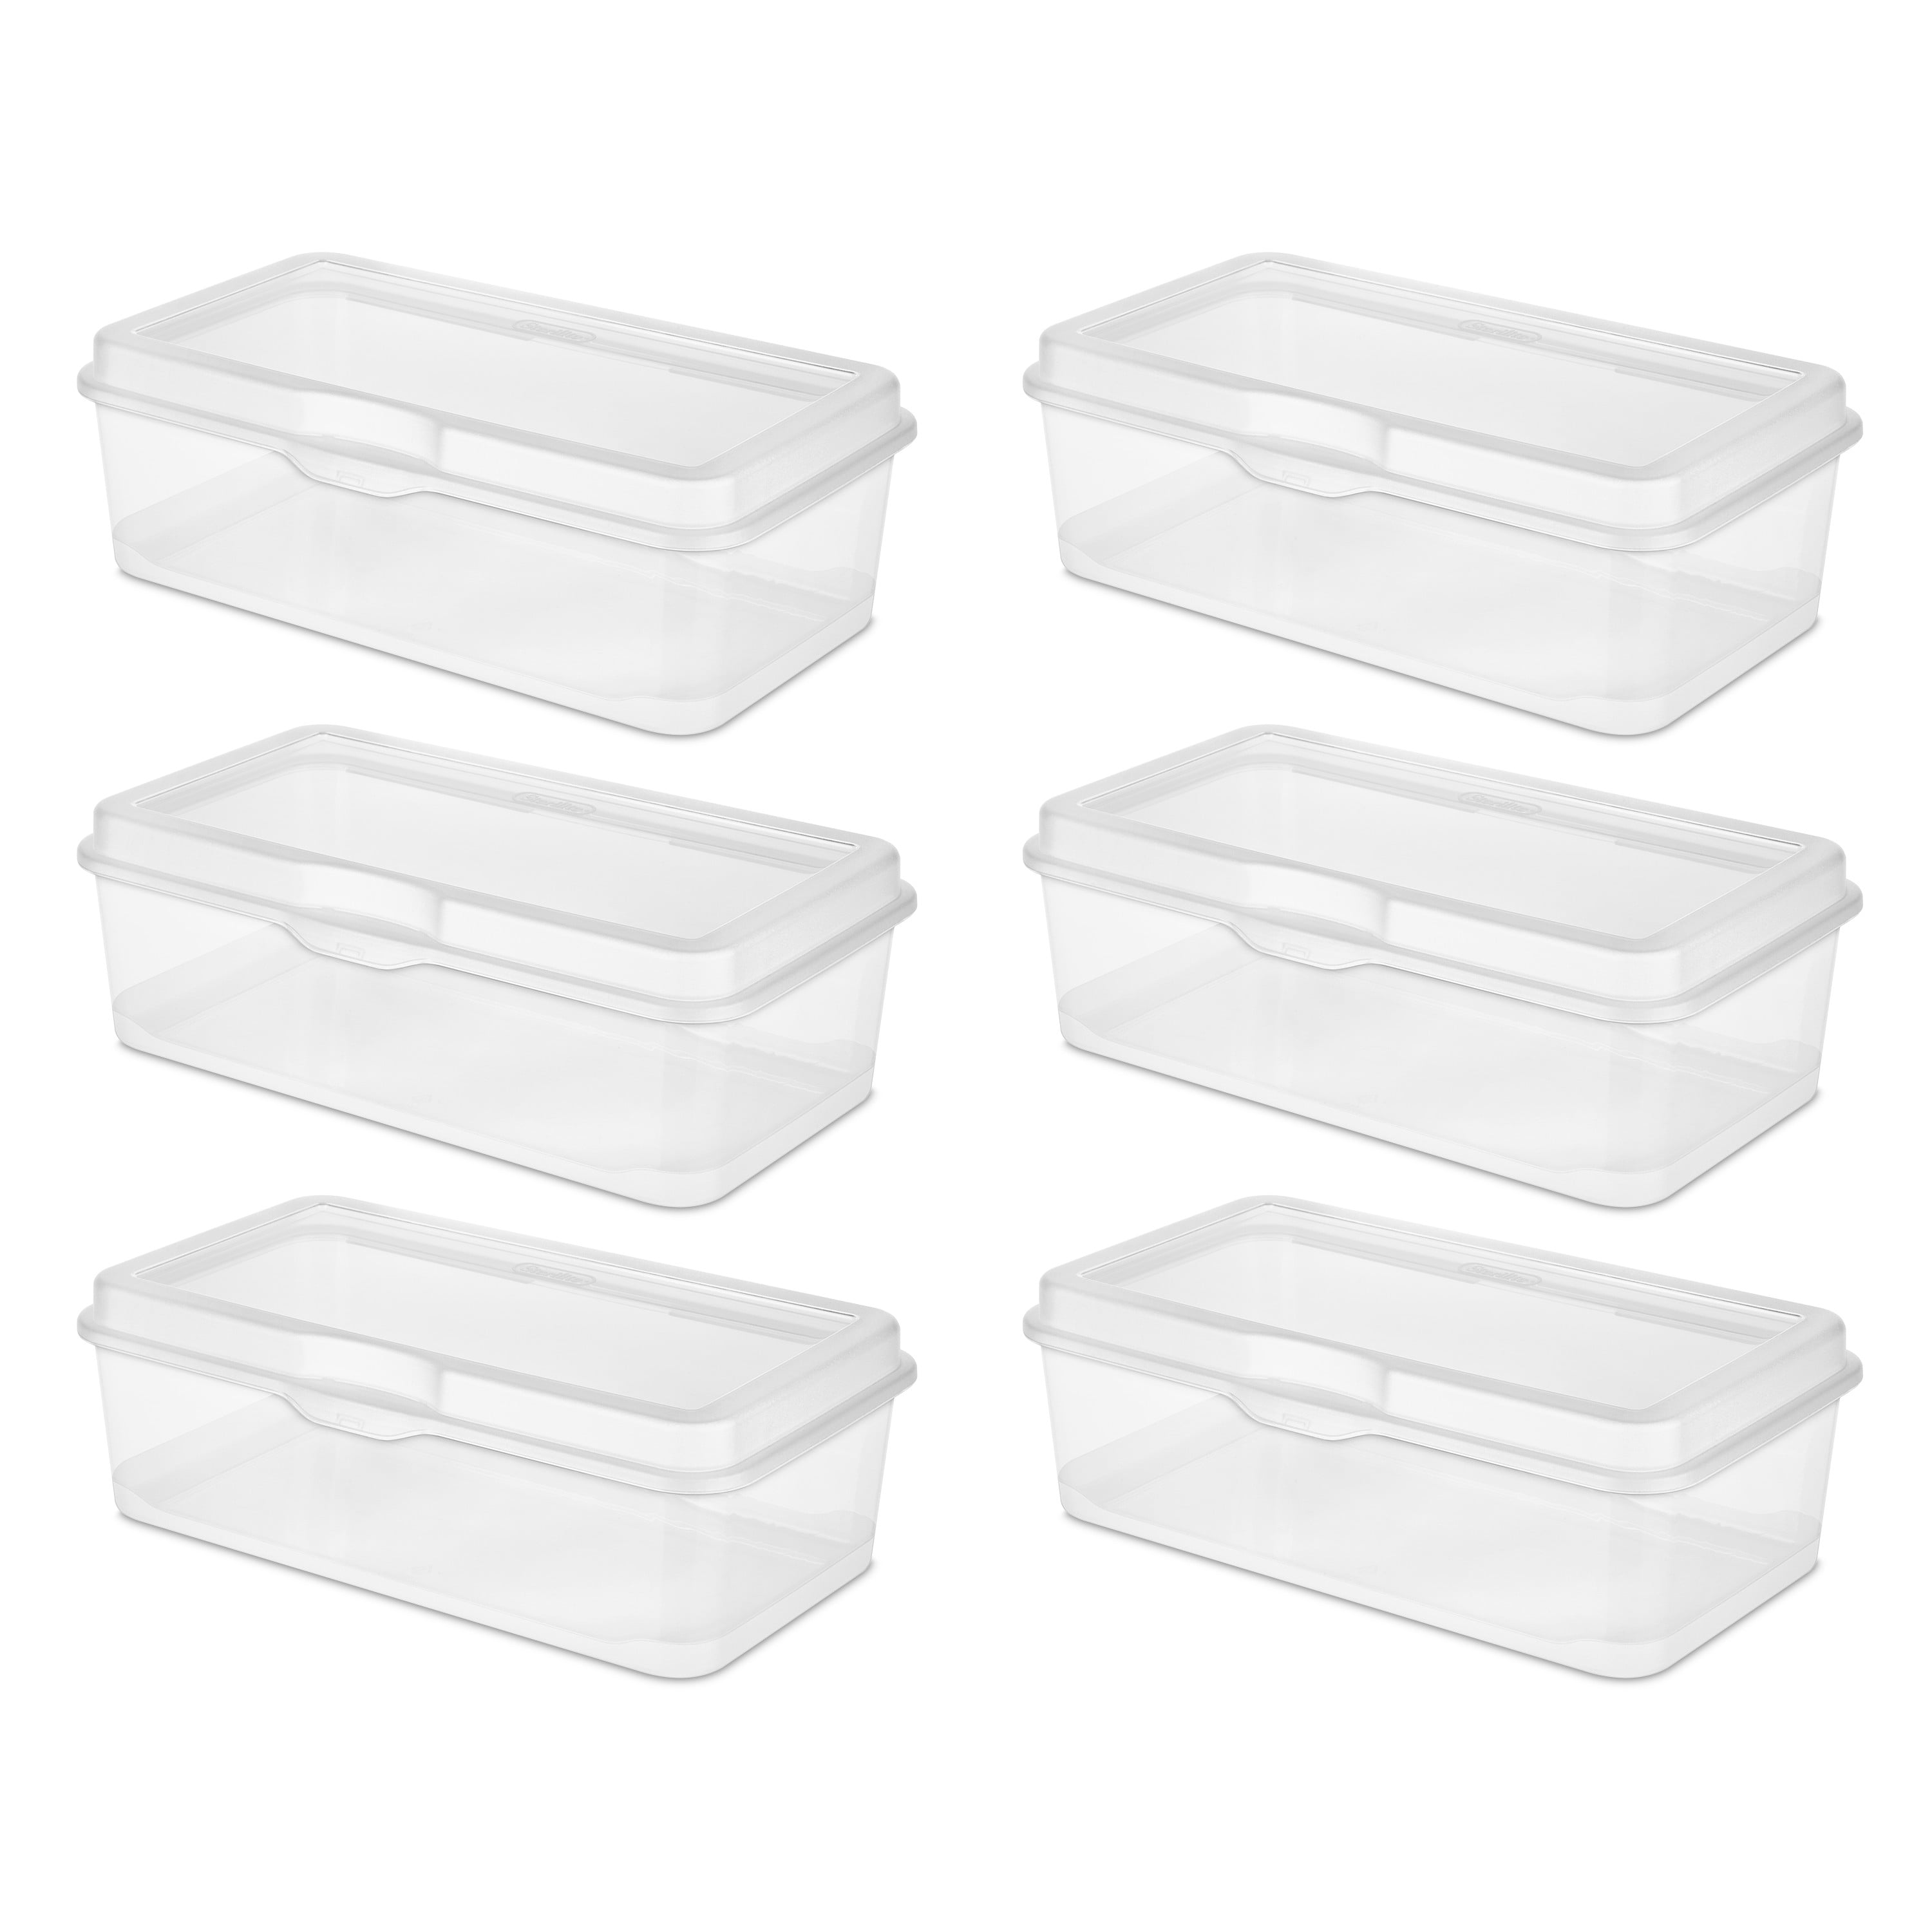 Sterilite Plastic Stacking FlipTop Latching Storage Box Container, Clear 24  Pack, 1 Piece - Harris Teeter